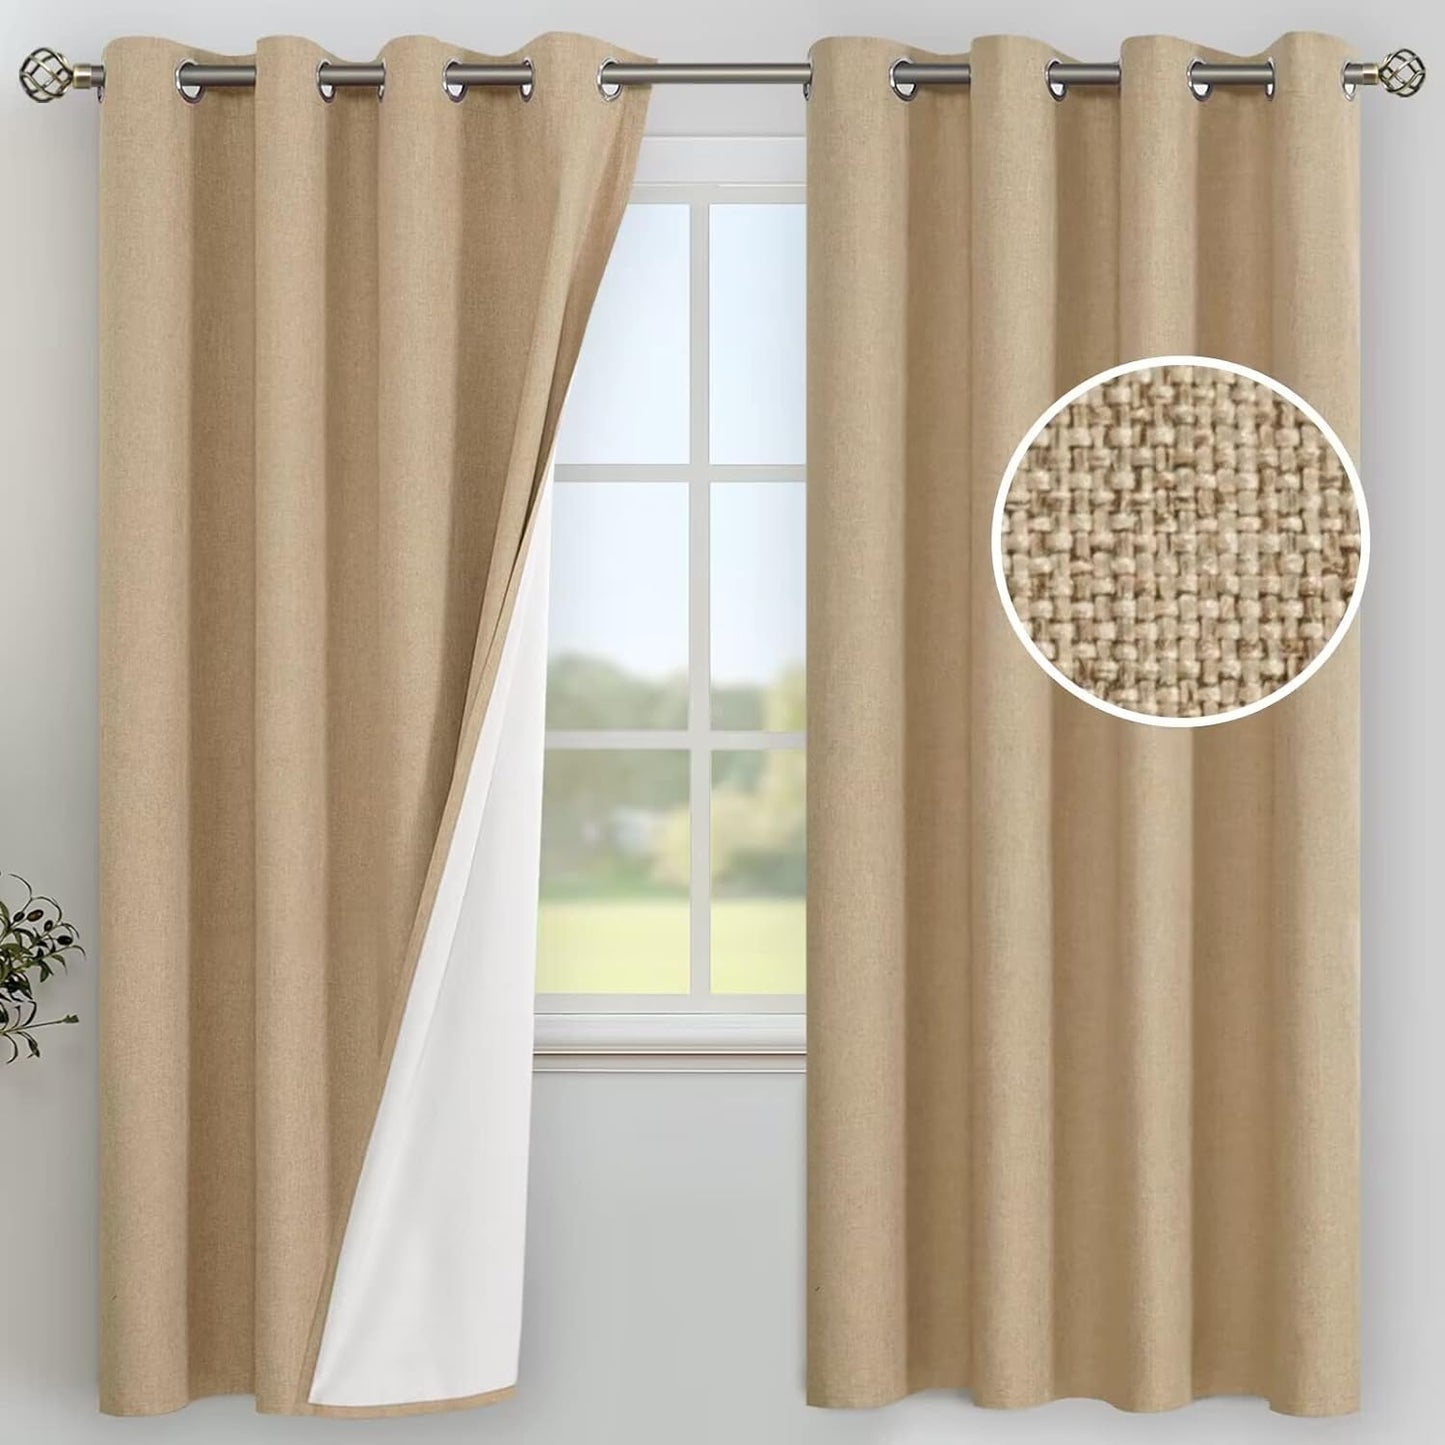 Youngstex Linen Blackout Curtains 63 Inches Long, Grommet Full Room Darkening Linen Window Drapes Thermal Insulated for Living Room Bedroom, 2 Panels, 52 X 63 Inch, Linen  YoungsTex Khaki 52W X 72L 